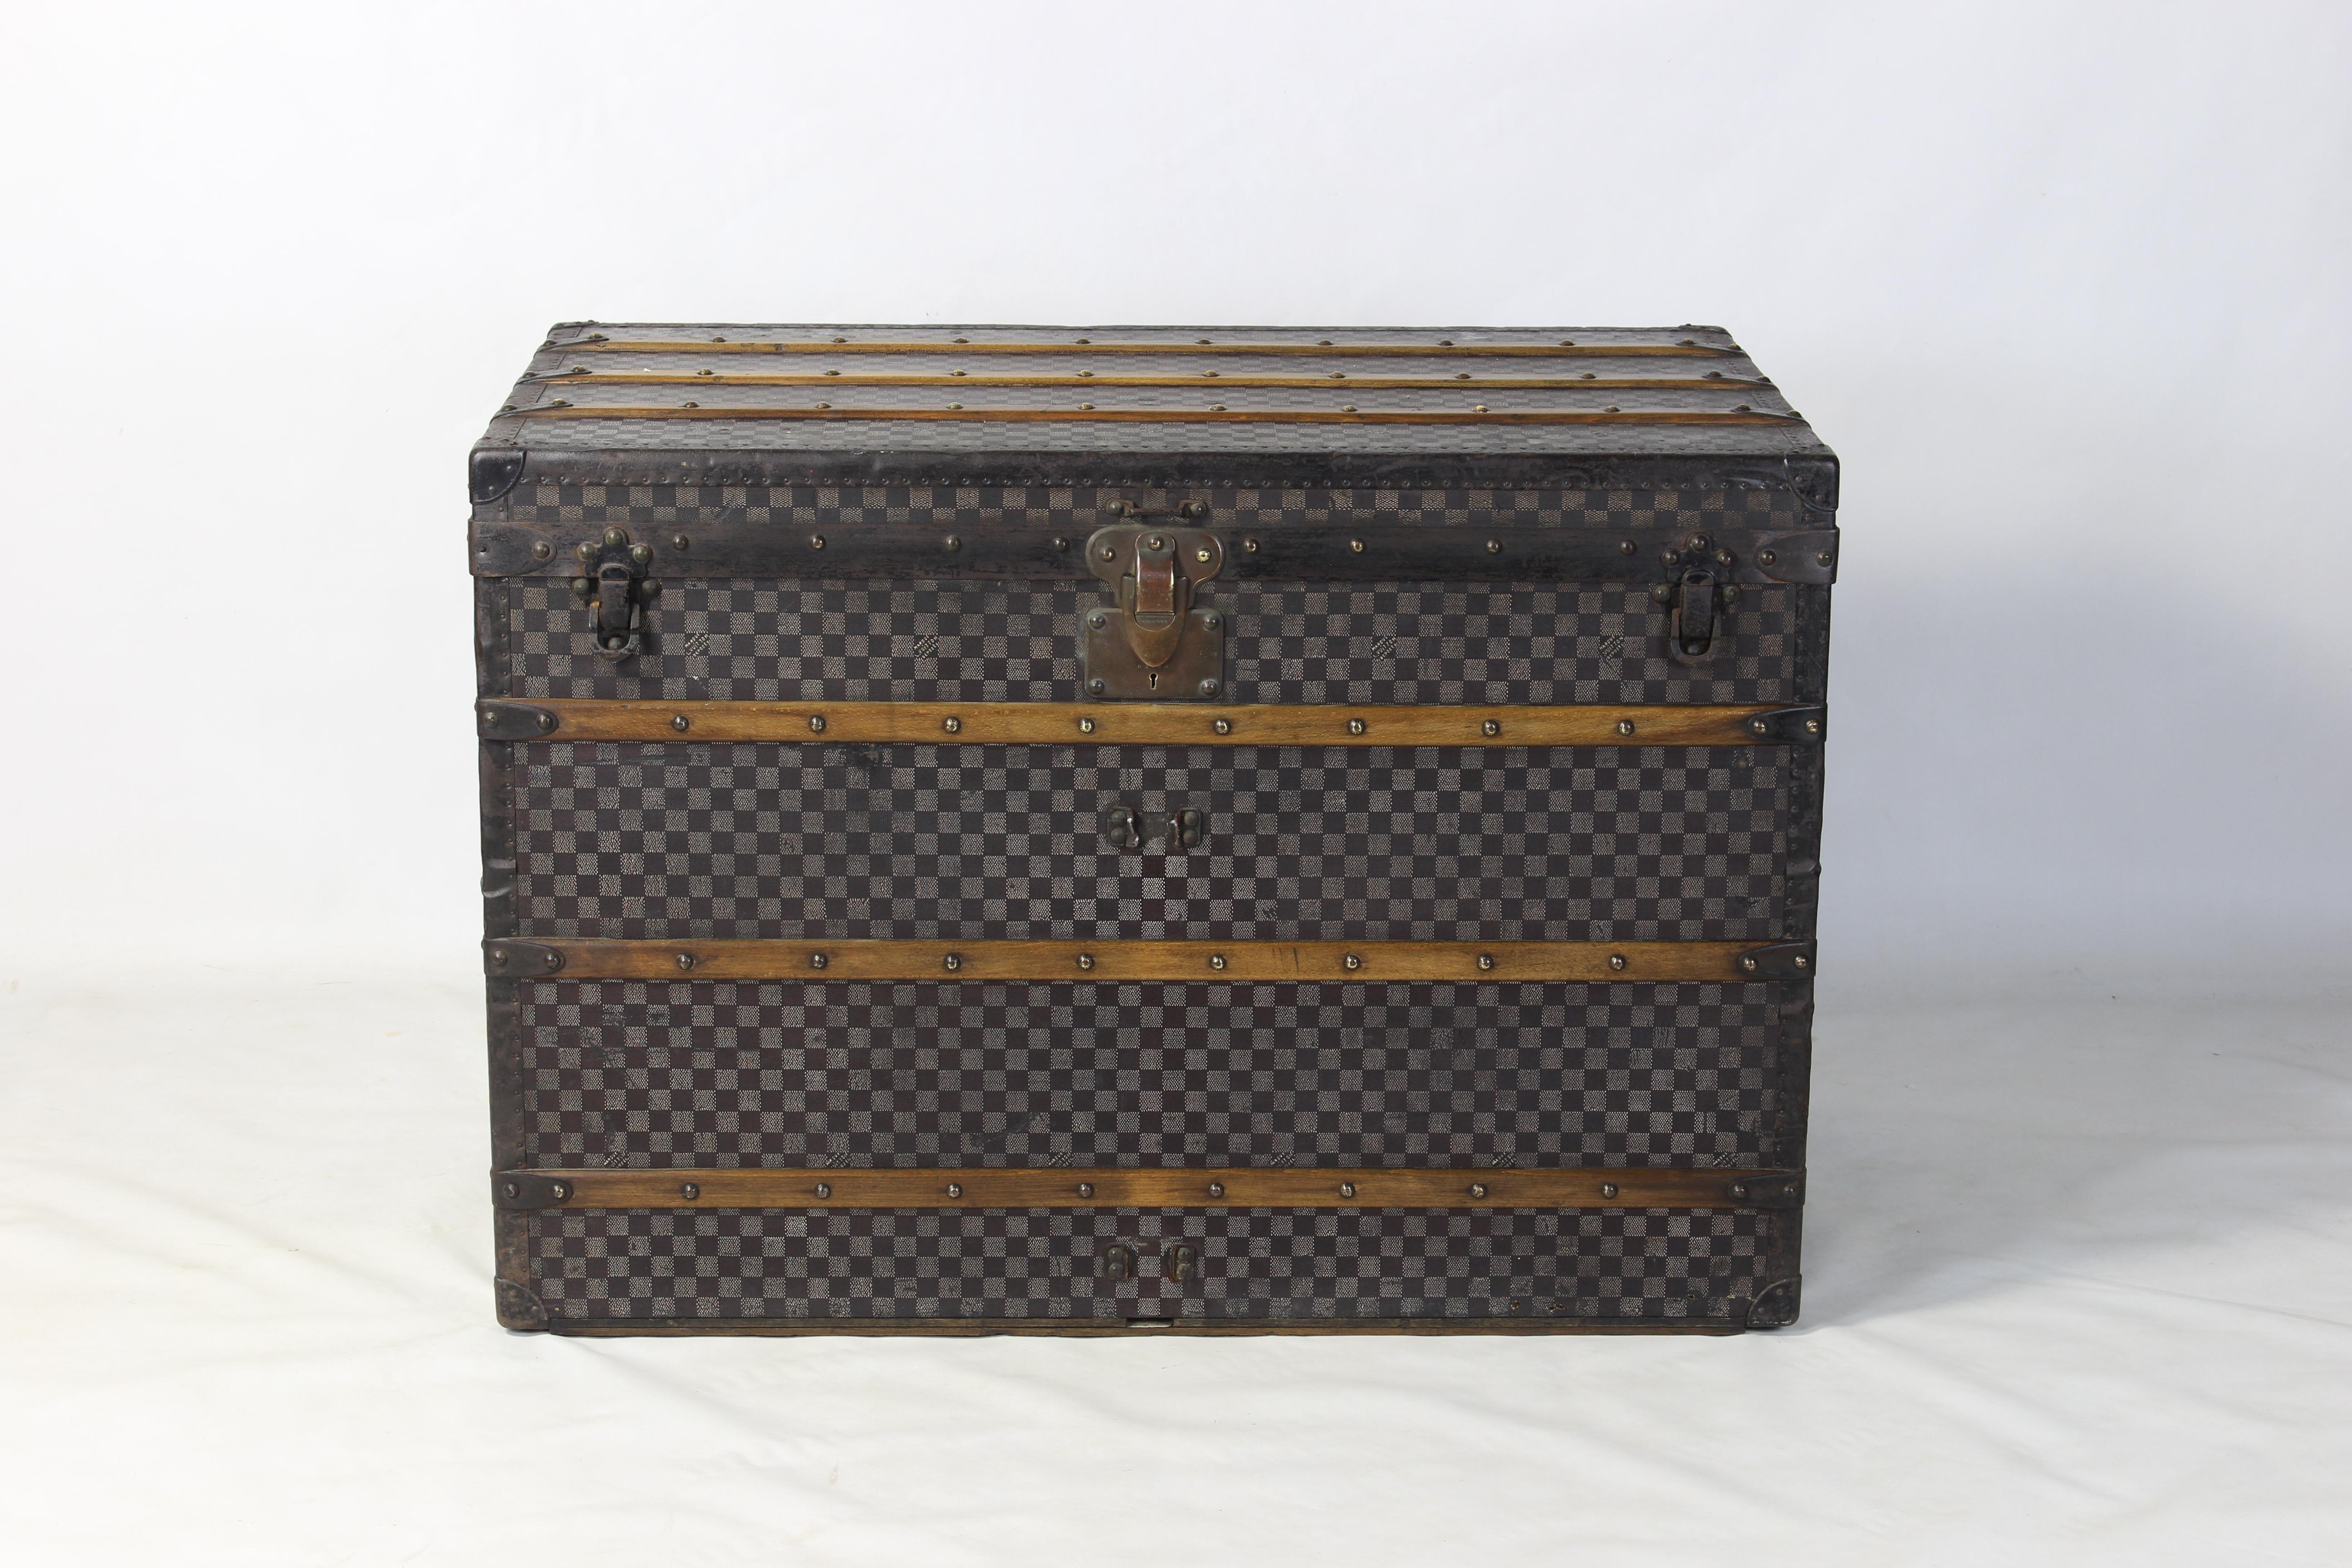 A large and impressive Louis Vuitton Damier steamer trunk, circa 1905. The rare checkerboard pattern with steel hardware and steel handles is in excellent condition for its age. The trunk is complete with its large original interior label and three